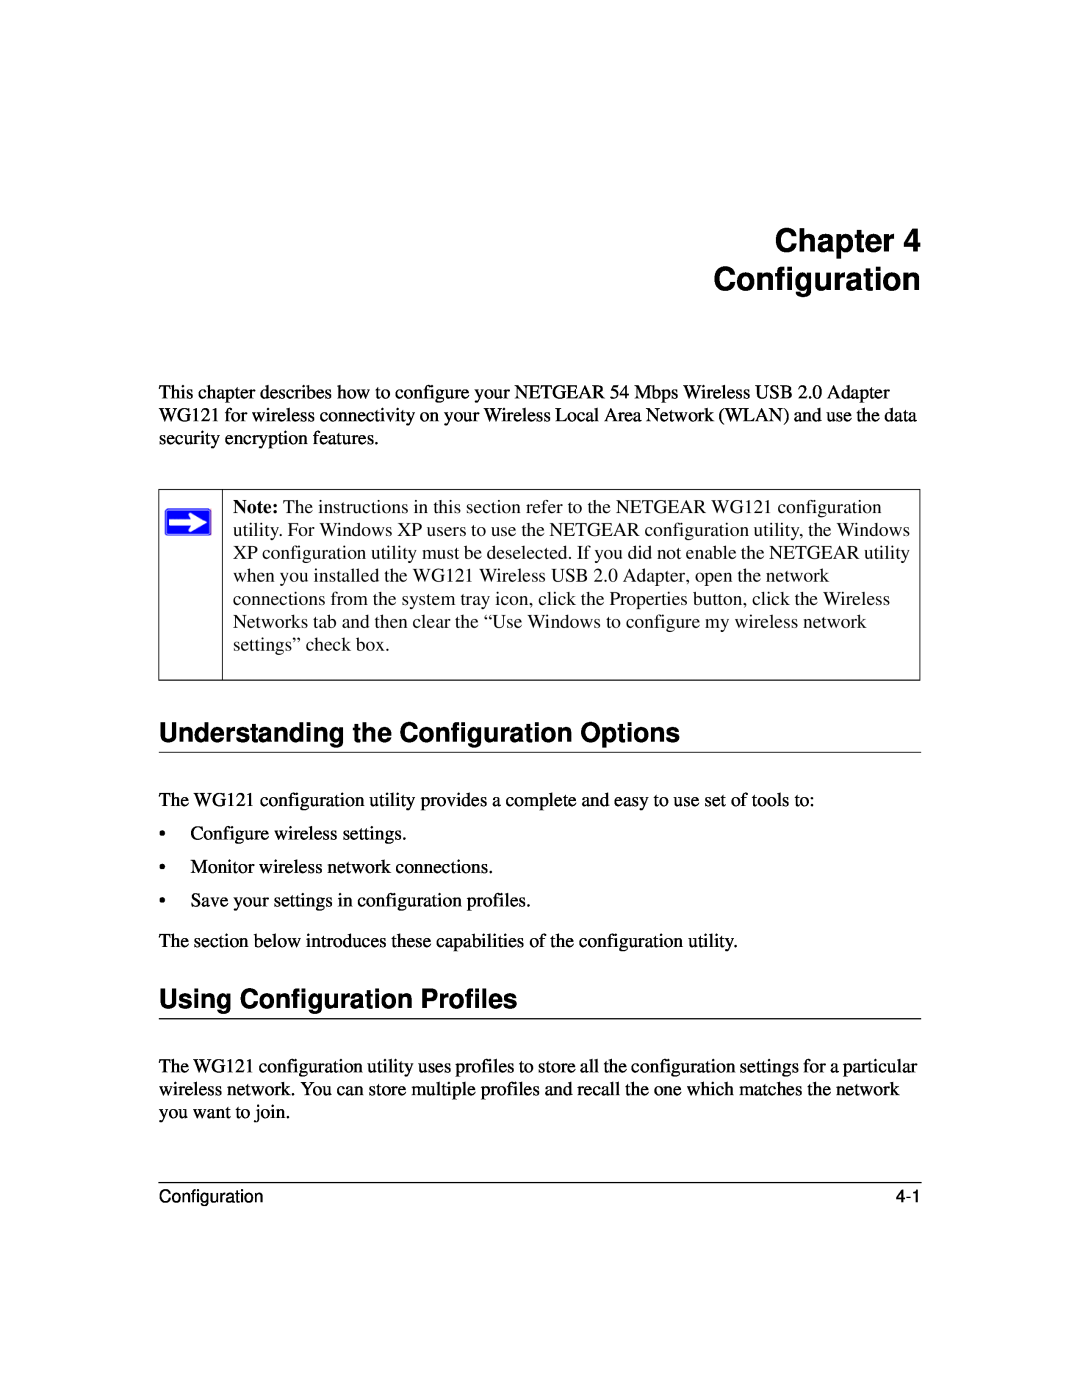 NETGEAR WG121 user manual Chapter Configuration, Understanding the Configuration Options, Using Configuration Profiles 